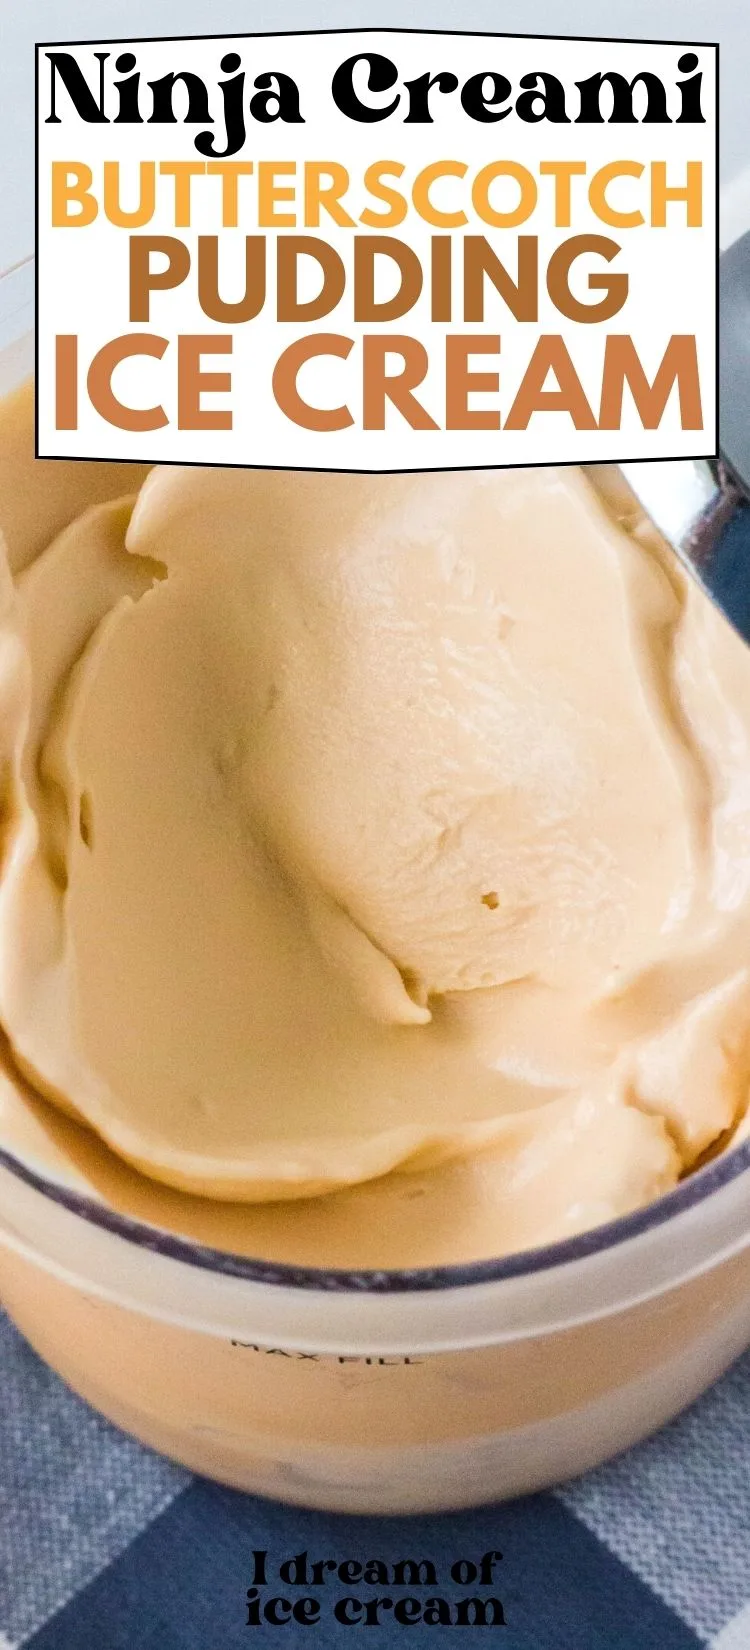 close-up view of Ninja Creami butterscotch ice cream in a pint container.